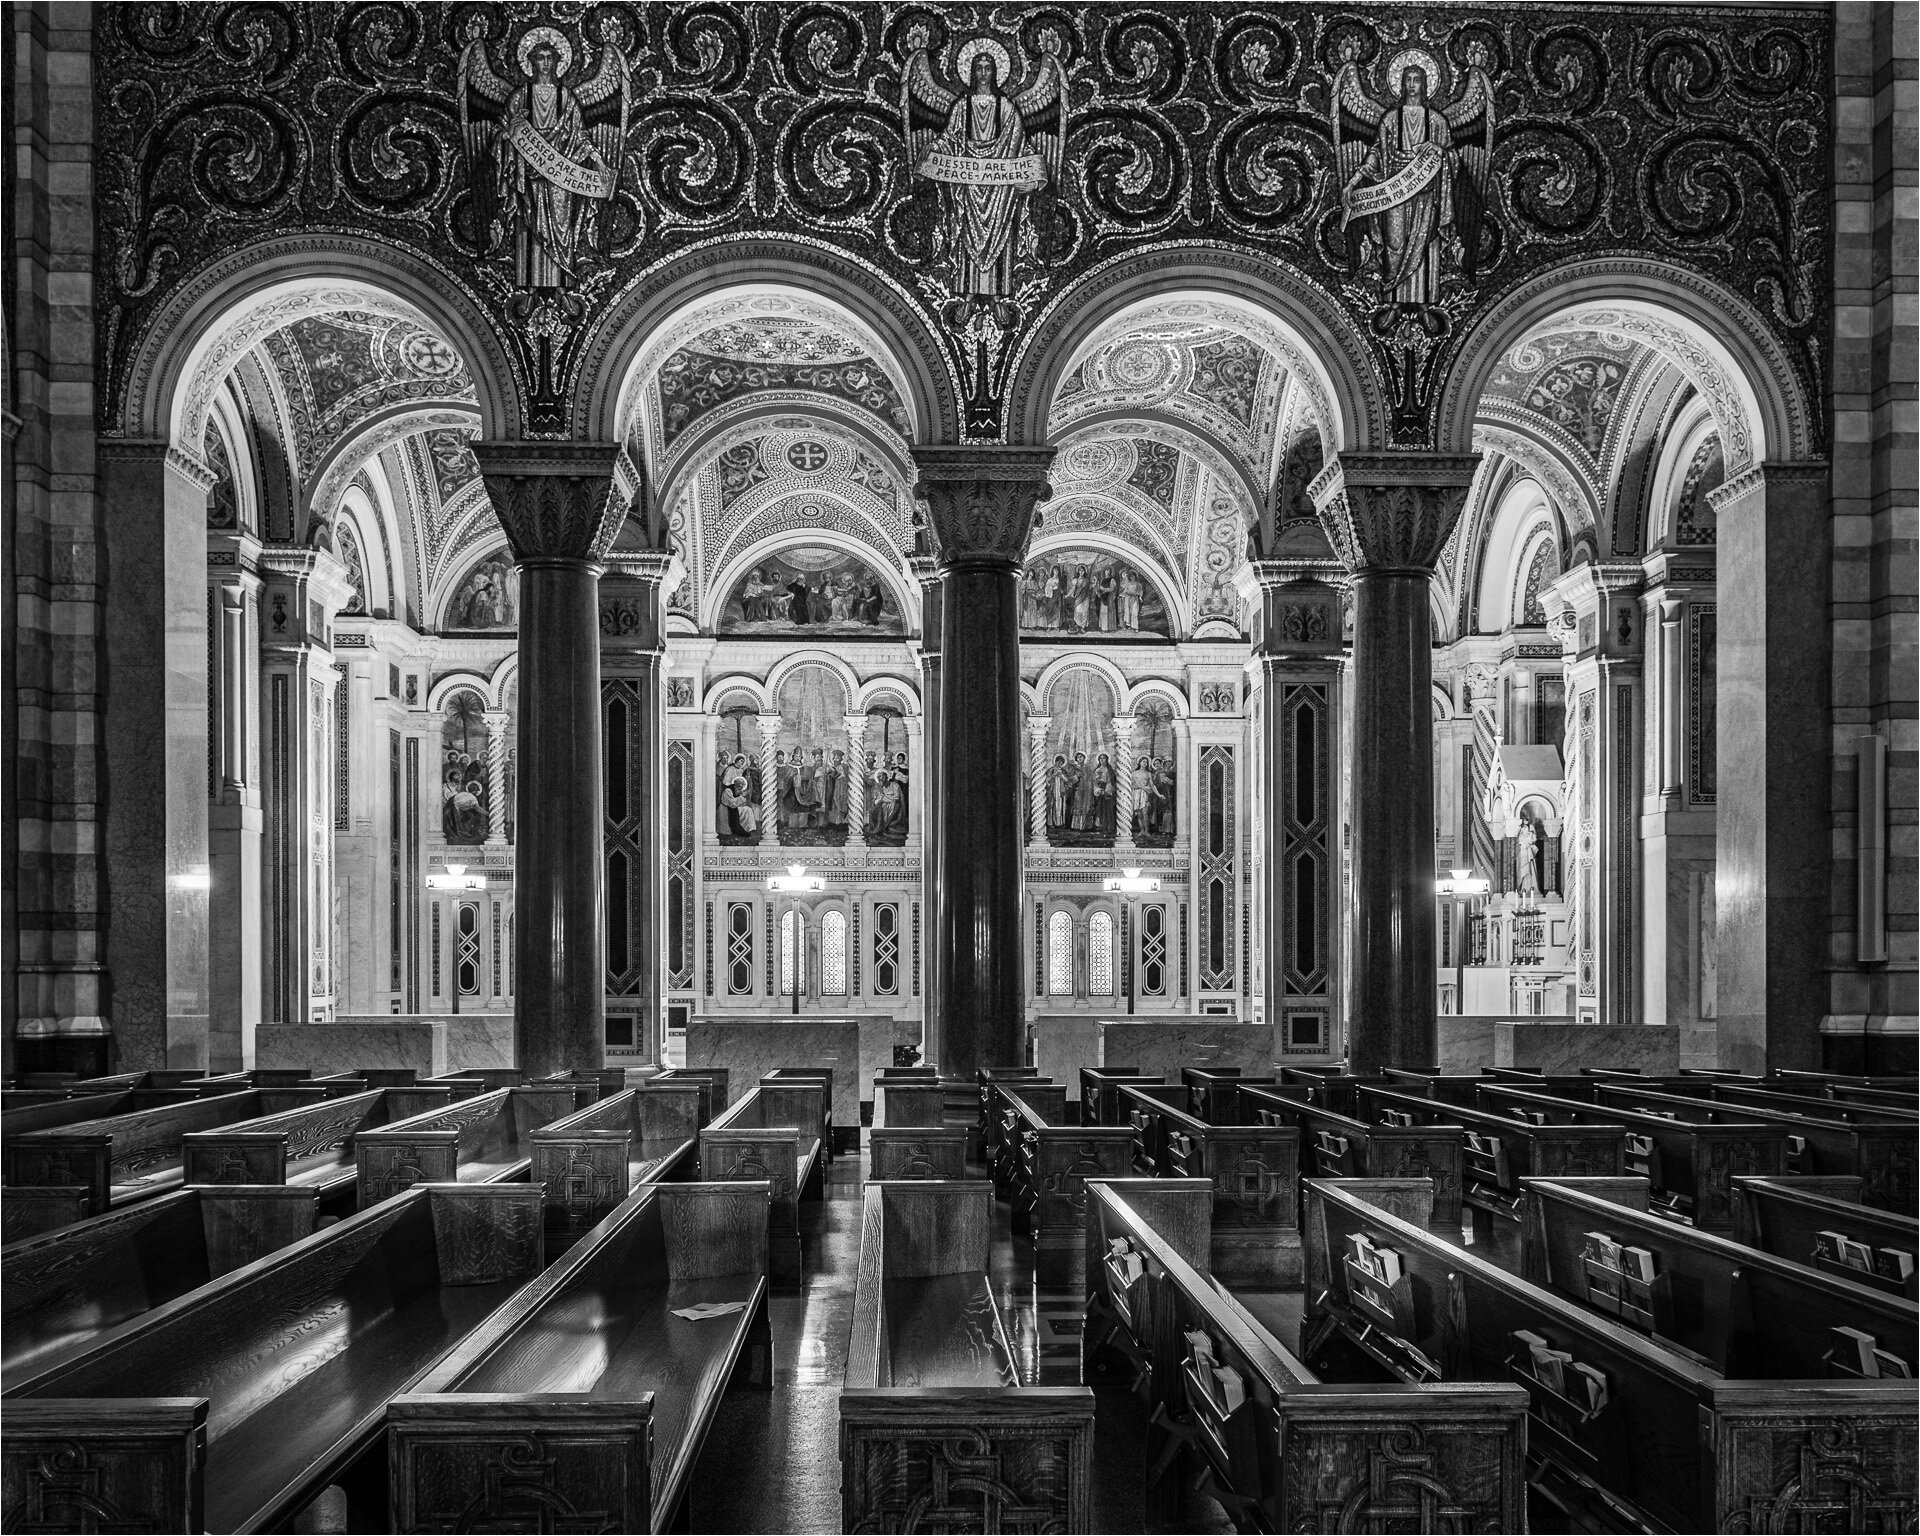 Cathedral Basilica of St. Louis, Number 1, 26"x30", digital photograph, 2019